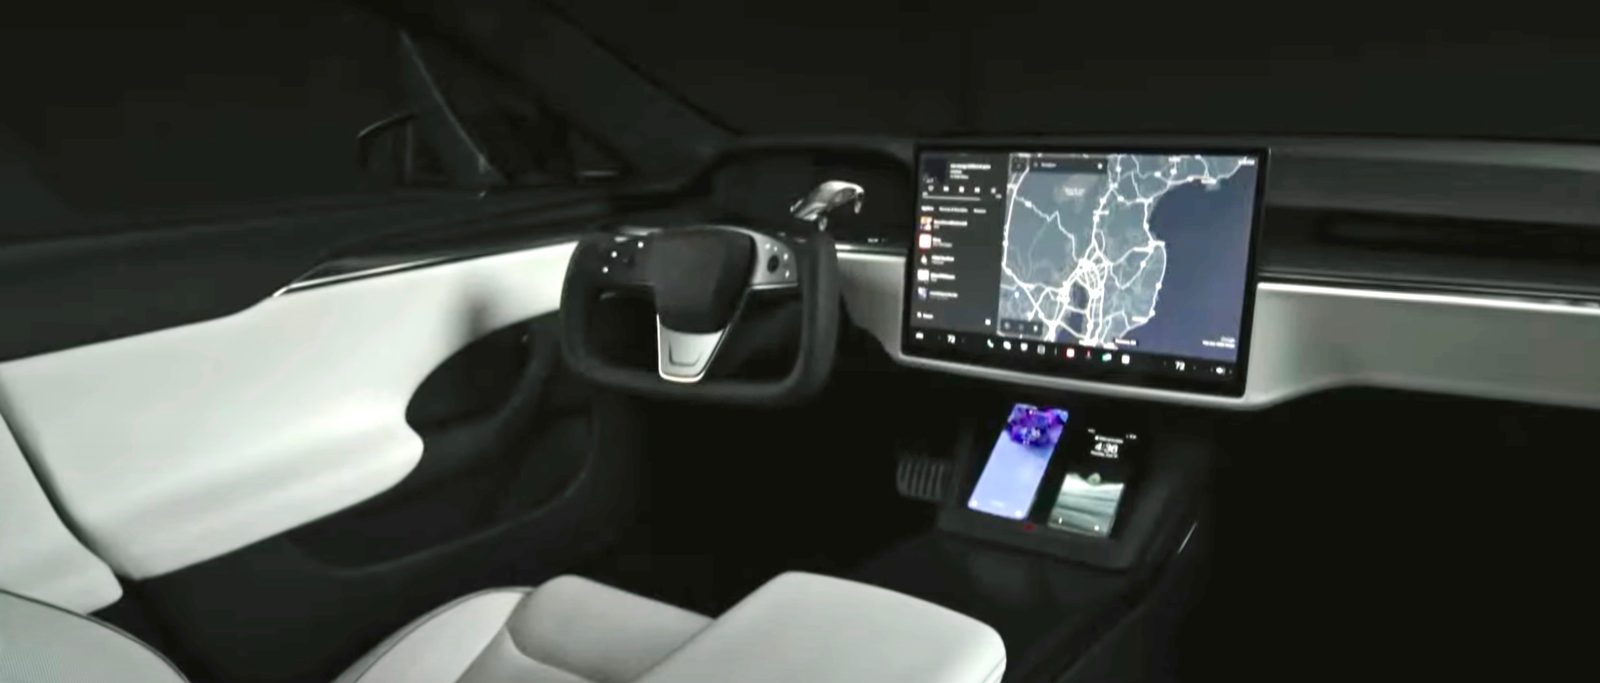 Download Tesla Launches Model S Plaid With New Motor Tech Faster Charging And New Entertainment Features Electrek